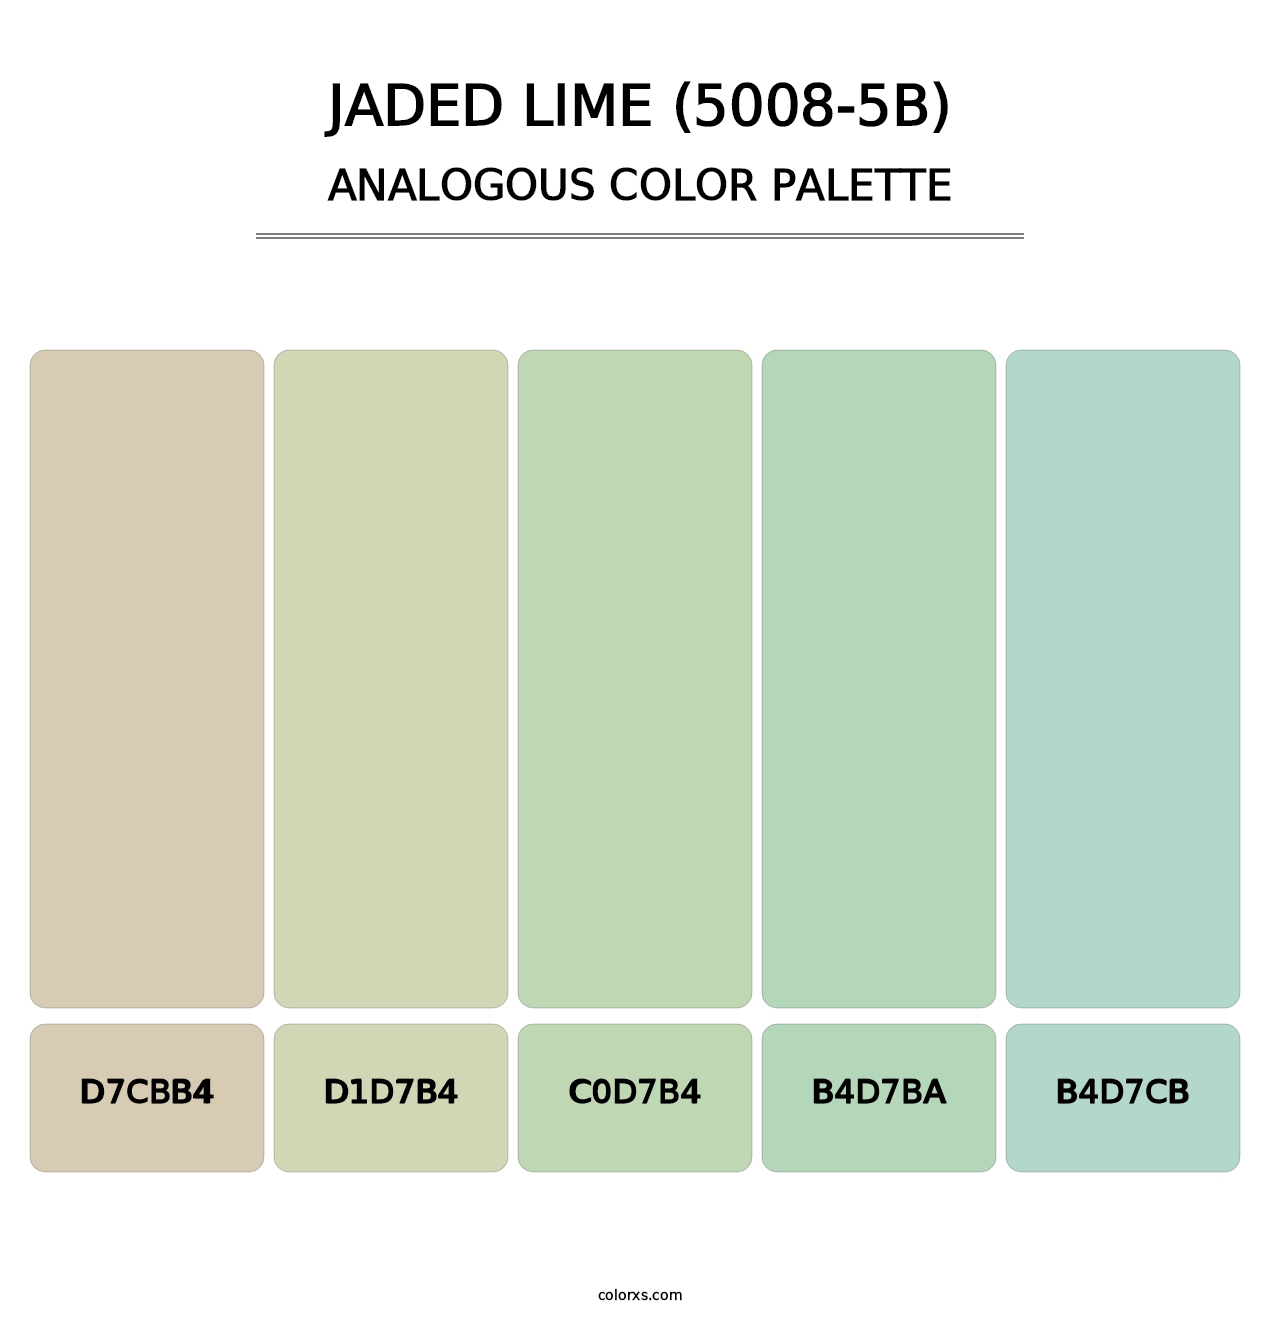 Jaded Lime (5008-5B) - Analogous Color Palette